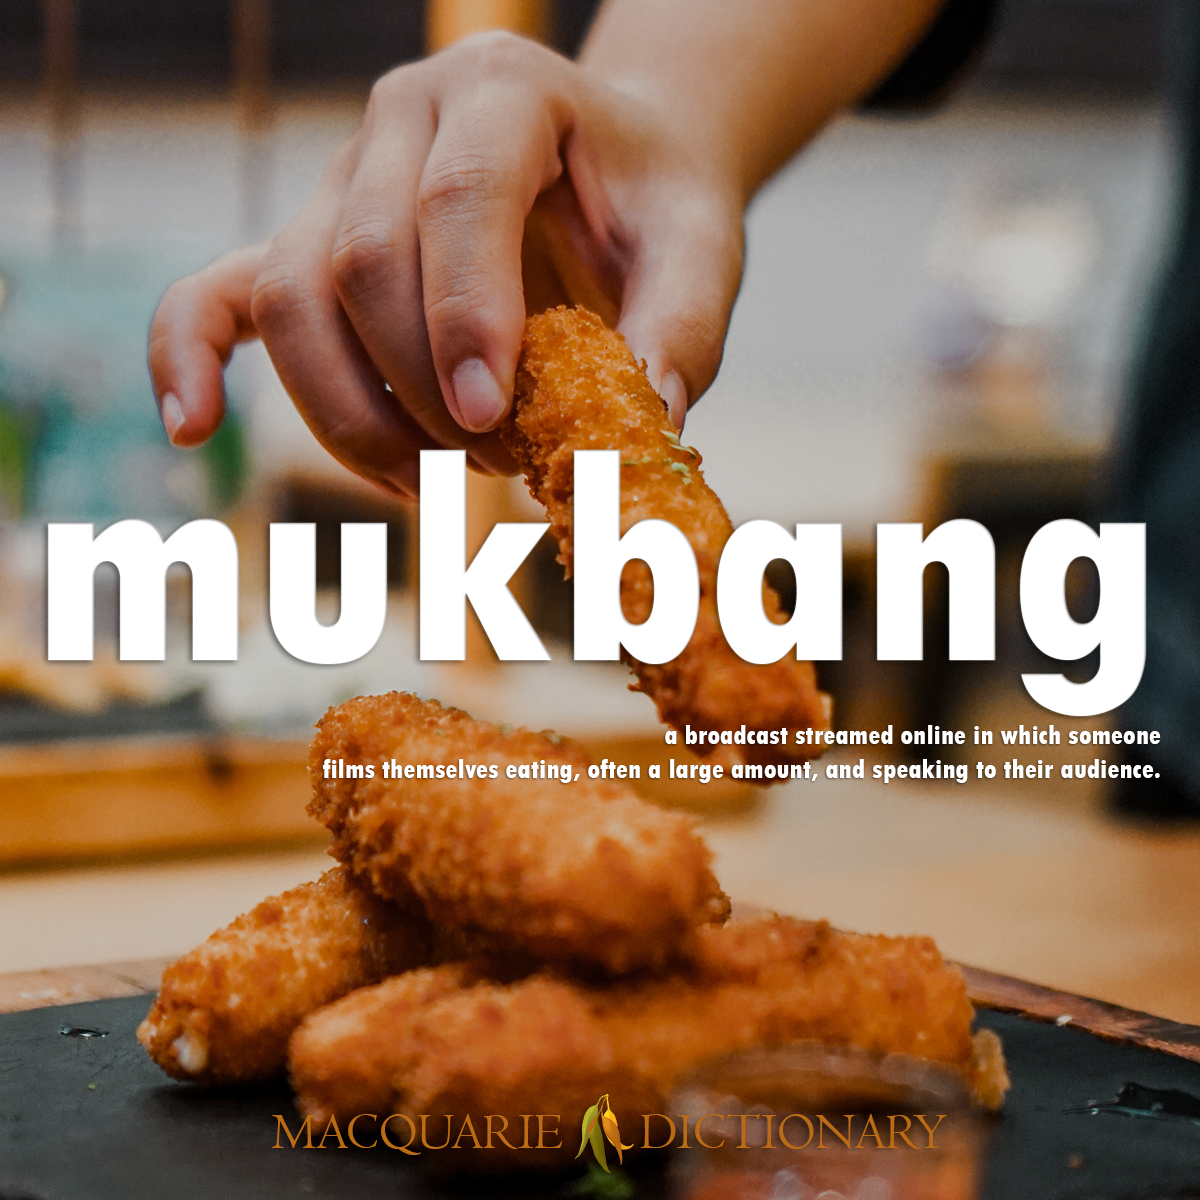 Image of Macquarie Dictionary Word of the Year mukbang a broadcast streamed online in which someone films themselves eating, often a large amount, and speaking to their audience.